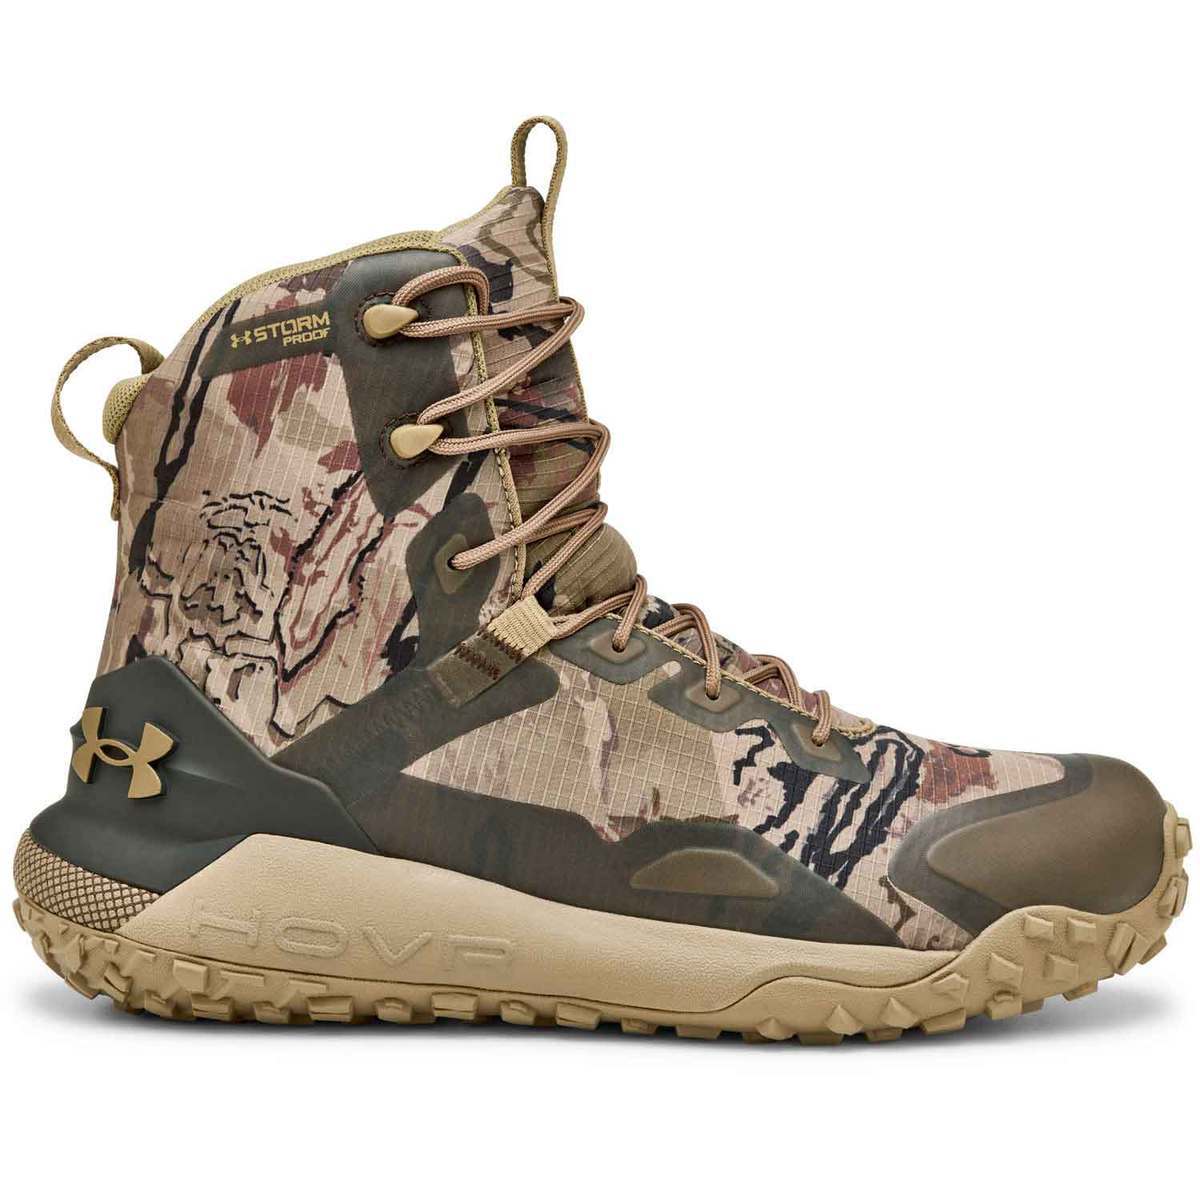 Under Armour Men's HOVR Dawn Uninsulated Waterproof Hunting Boots ...